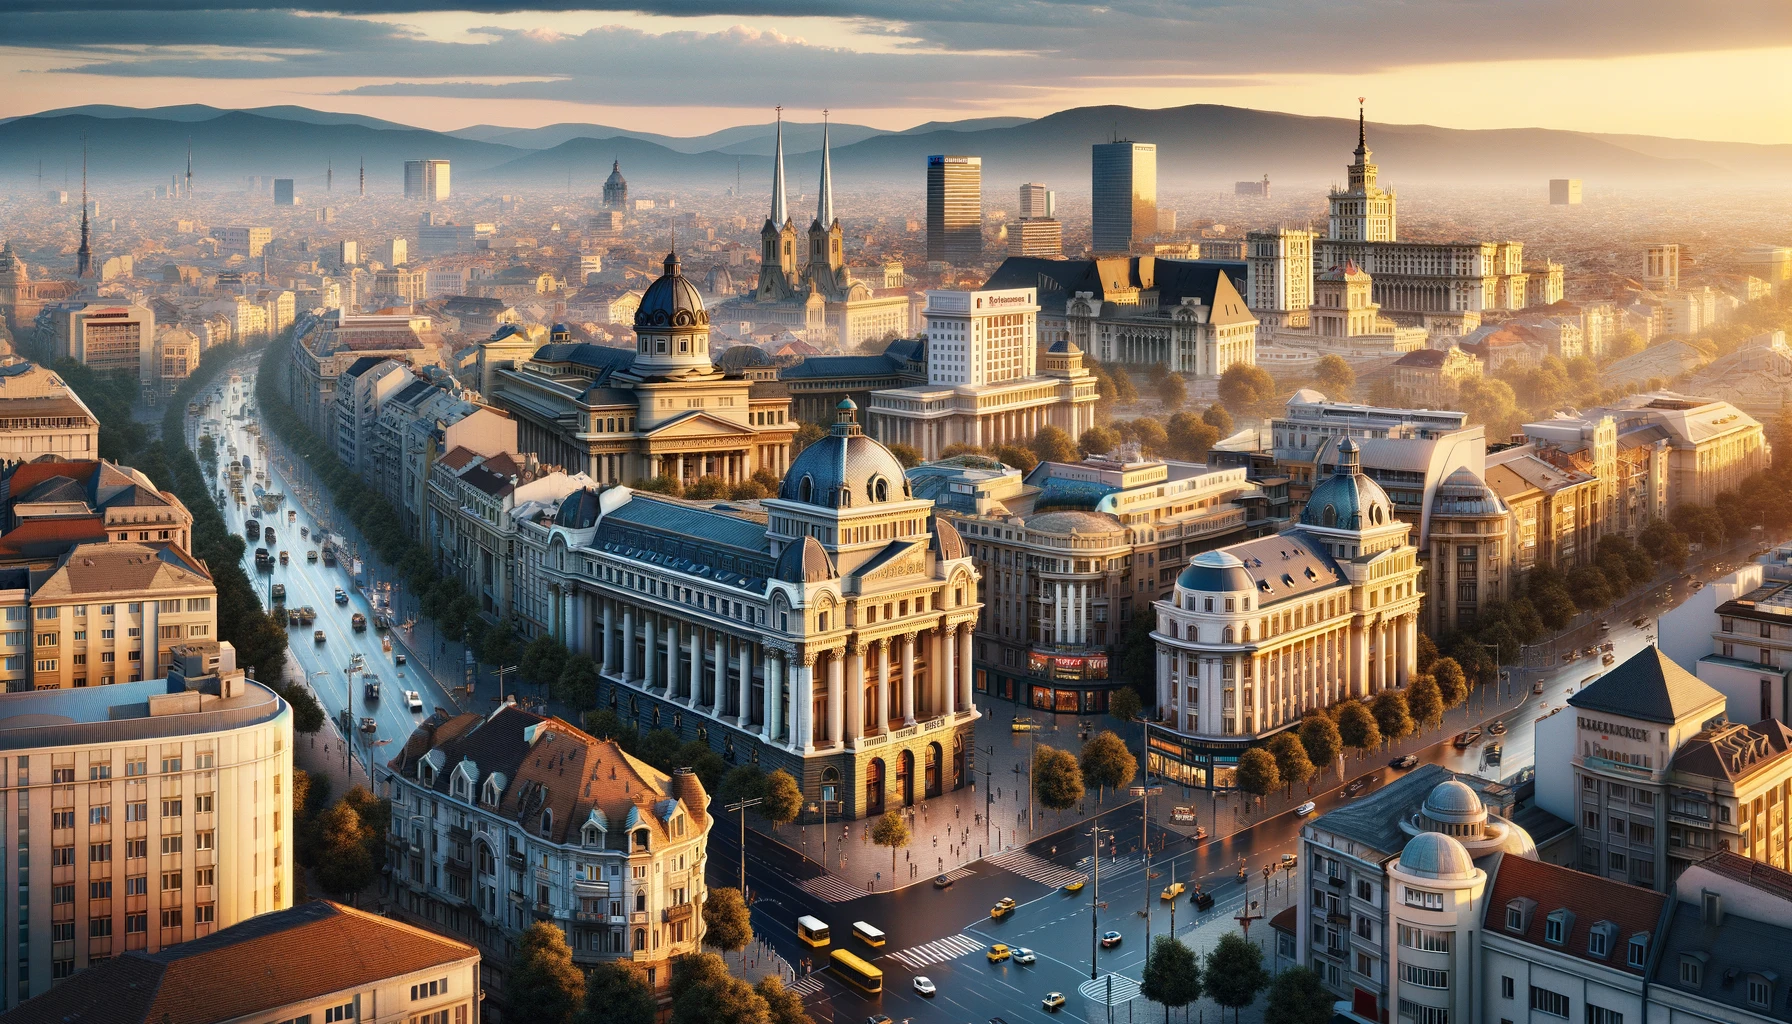 <p>Bucharest, Romania’s capital, combines the allure of classical architecture with the buzz of a modern city. Living costs in Bucharest are among the lowest in Europe, and the city offers a high standard of living with affordable healthcare, transportation, and entertainment options.</p>